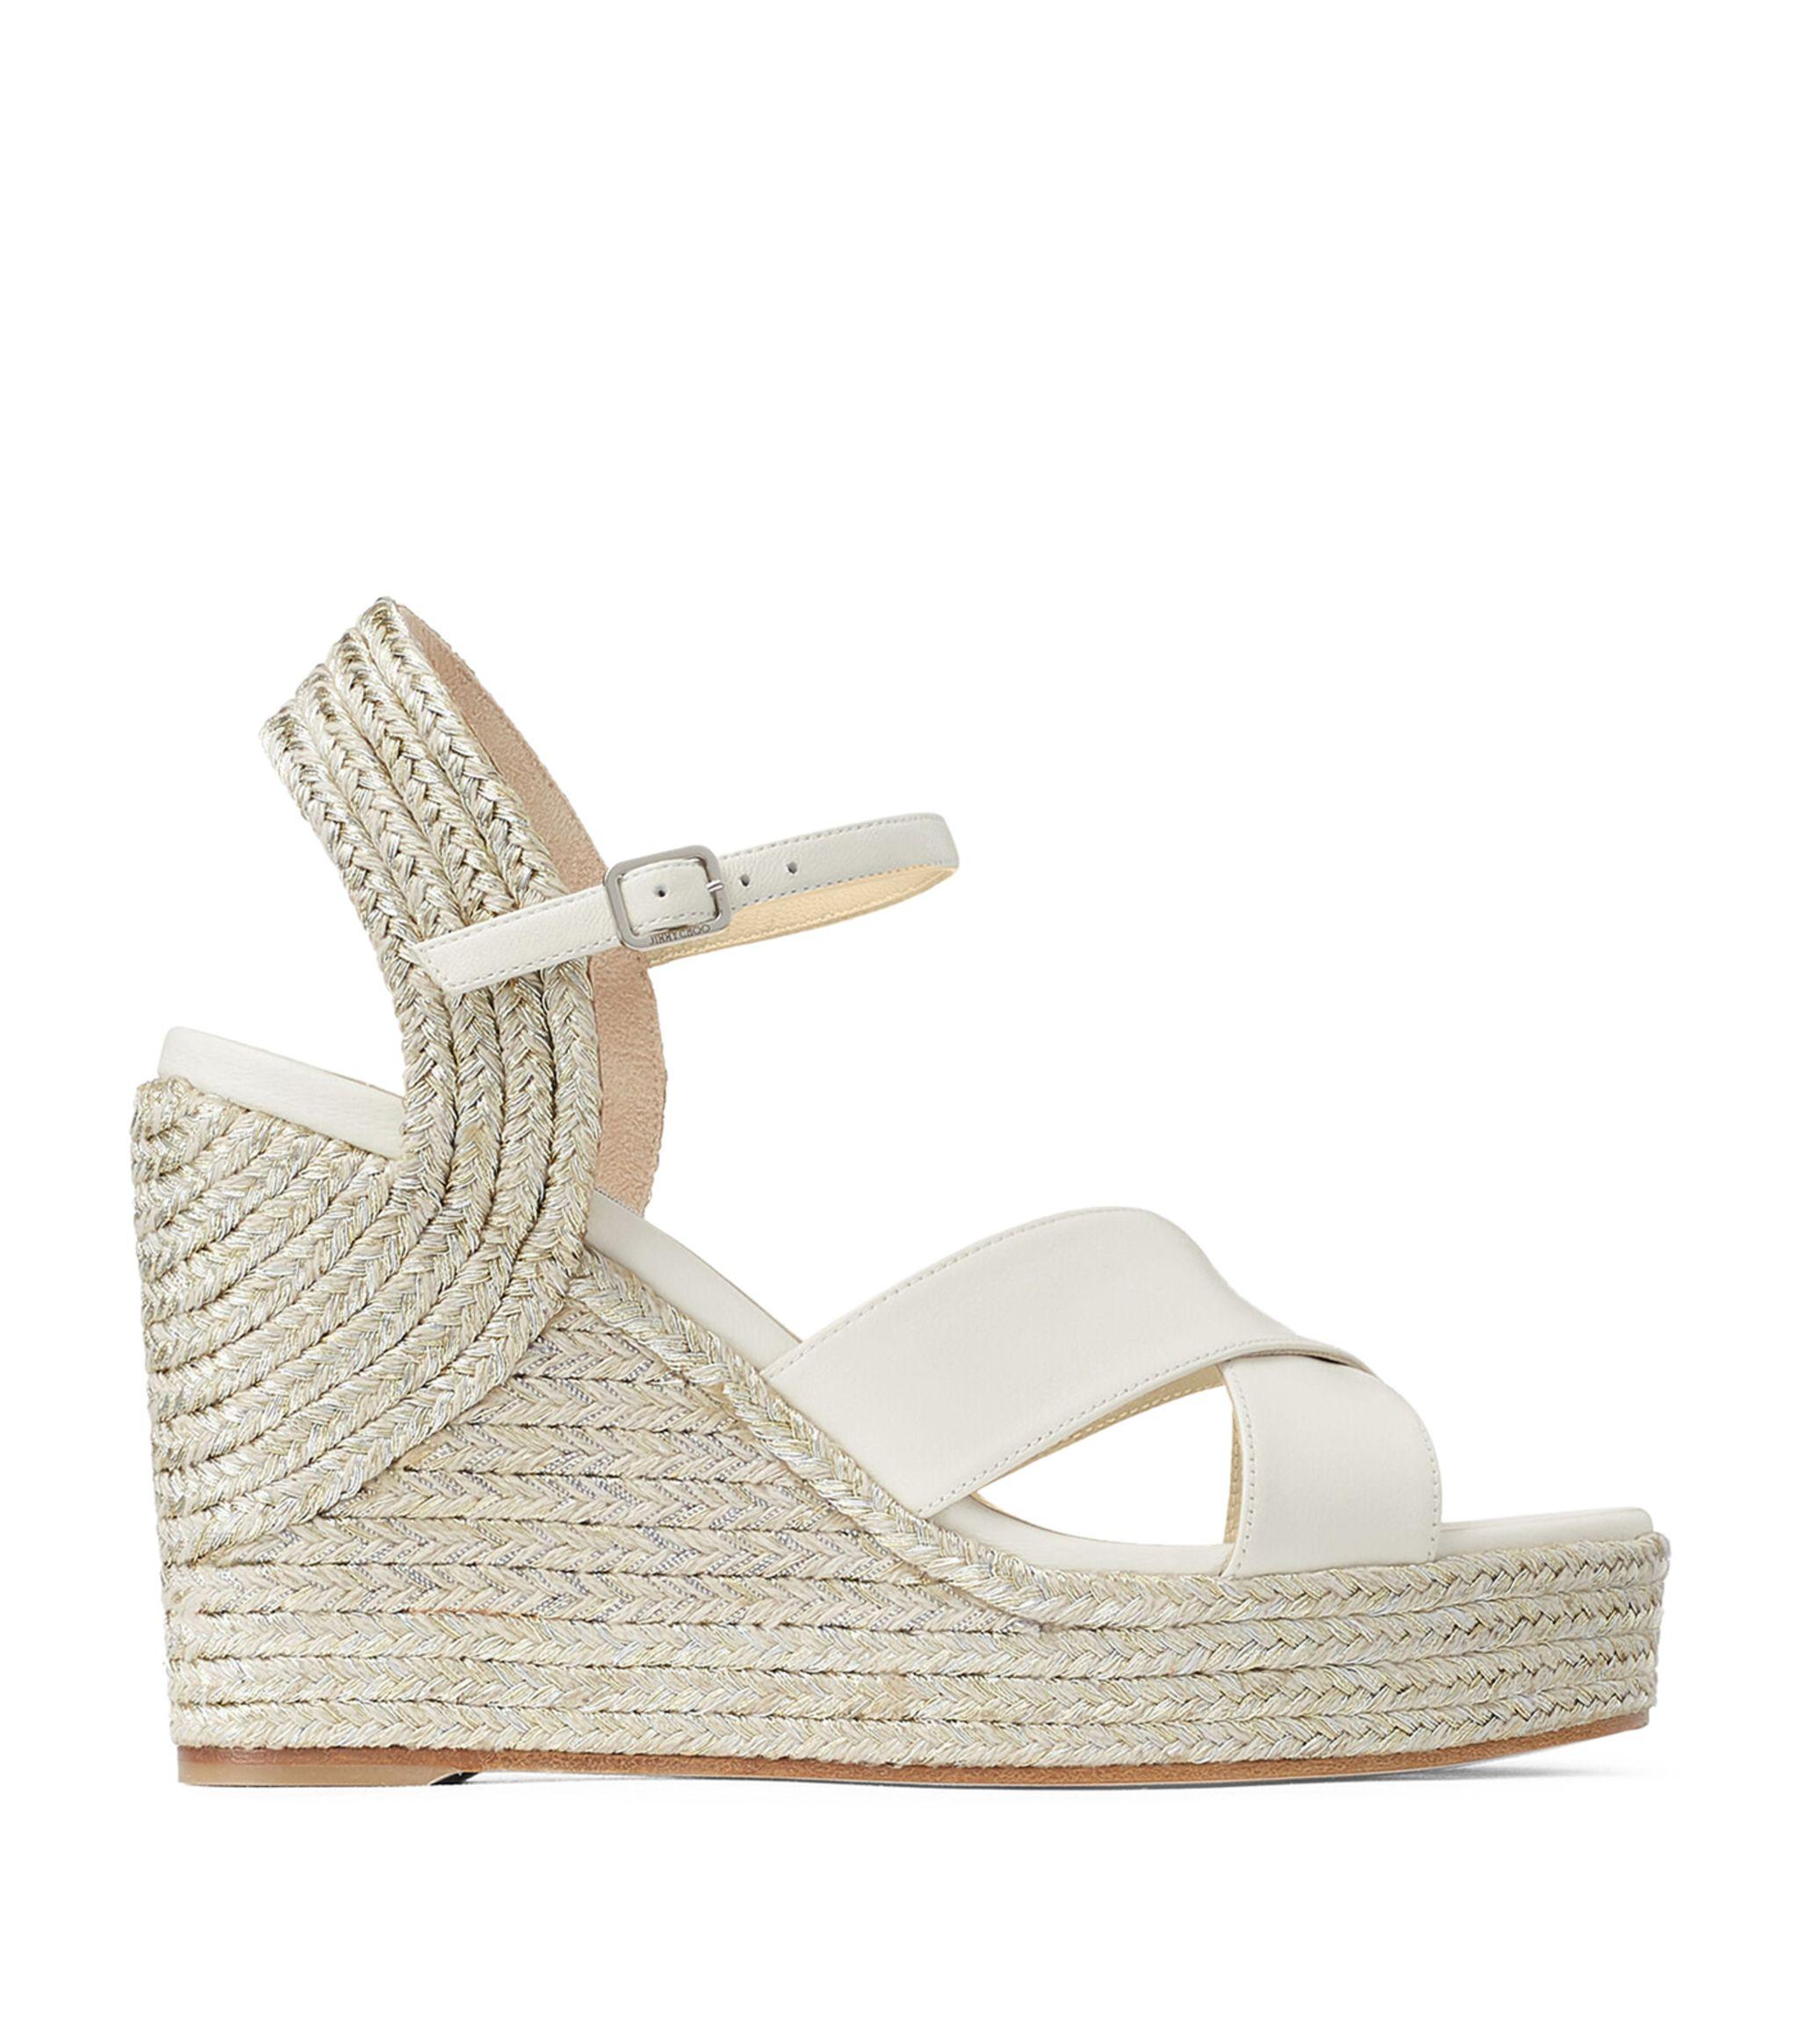 Jimmy Choo Dellena 100 Leather Espadrille Sandals in White - Lyst